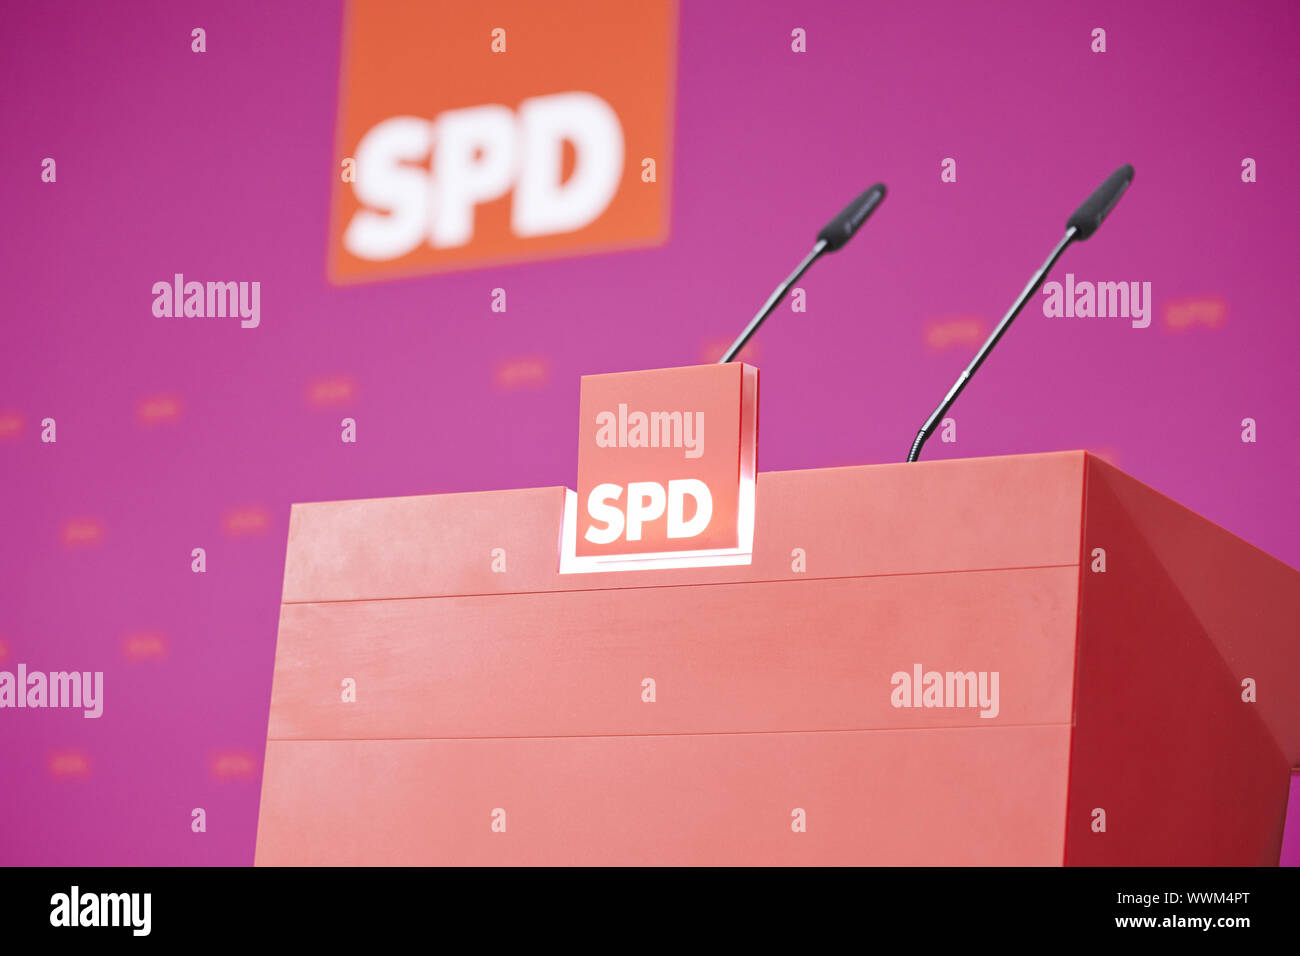 Peer Steinbrück (SPD), SPD chancellor candidate for the election, and party Chairman, Sigmar Gabriel (SPD), give press conferen Stock Photo